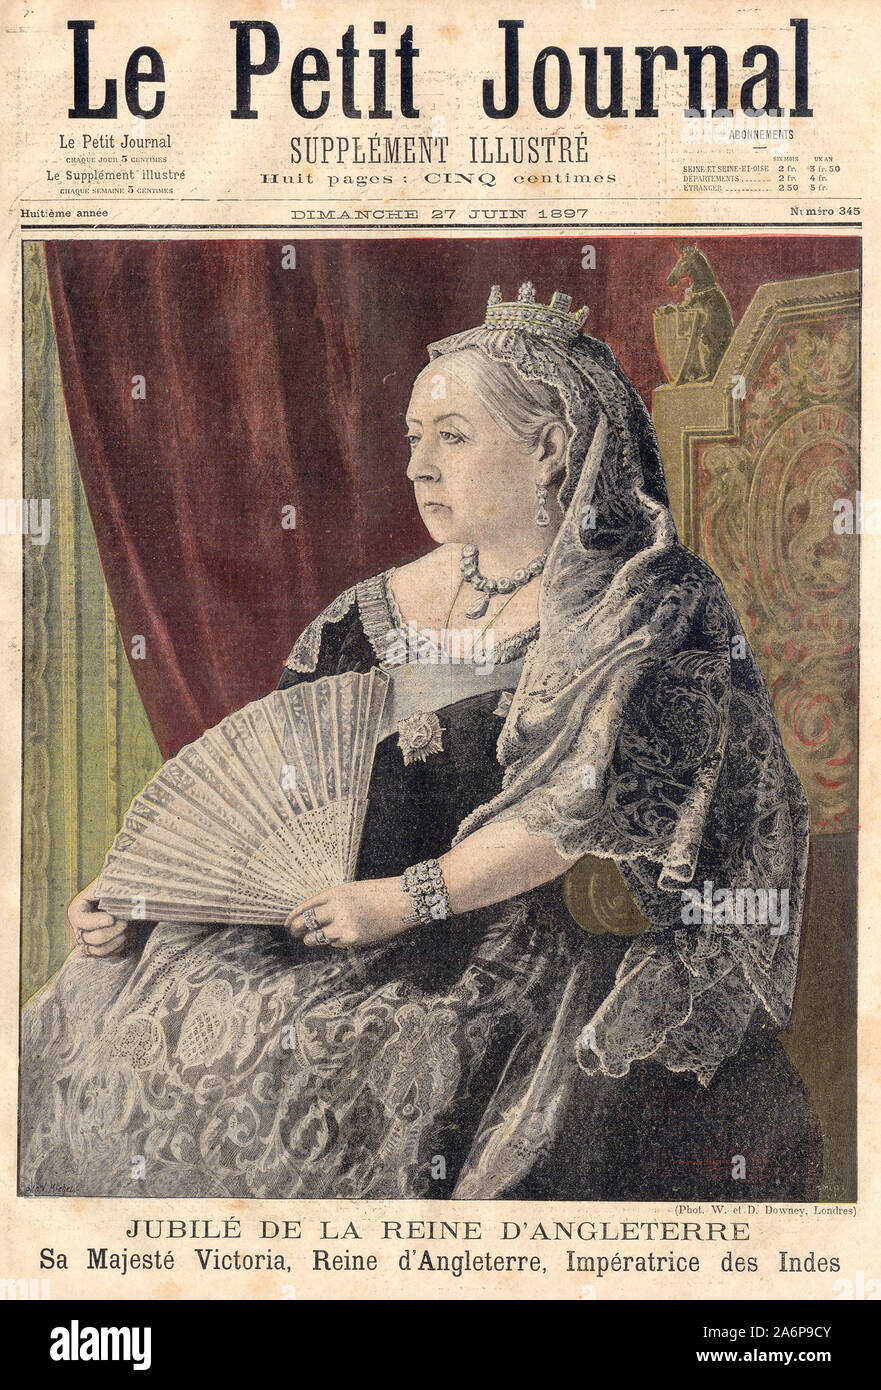 JUBILÉ DE LA REINE D'ANGLETERRE Majesté Victoria, Reine d'Angleterre, Impératrice des Indes - JUBILEE OF THE QUEEN OF ENGLAND Majesty Victoria, Queen of England, Empress of India - In "Le Petit Journal" French illustrated newspaper - 1897 Stock Photo